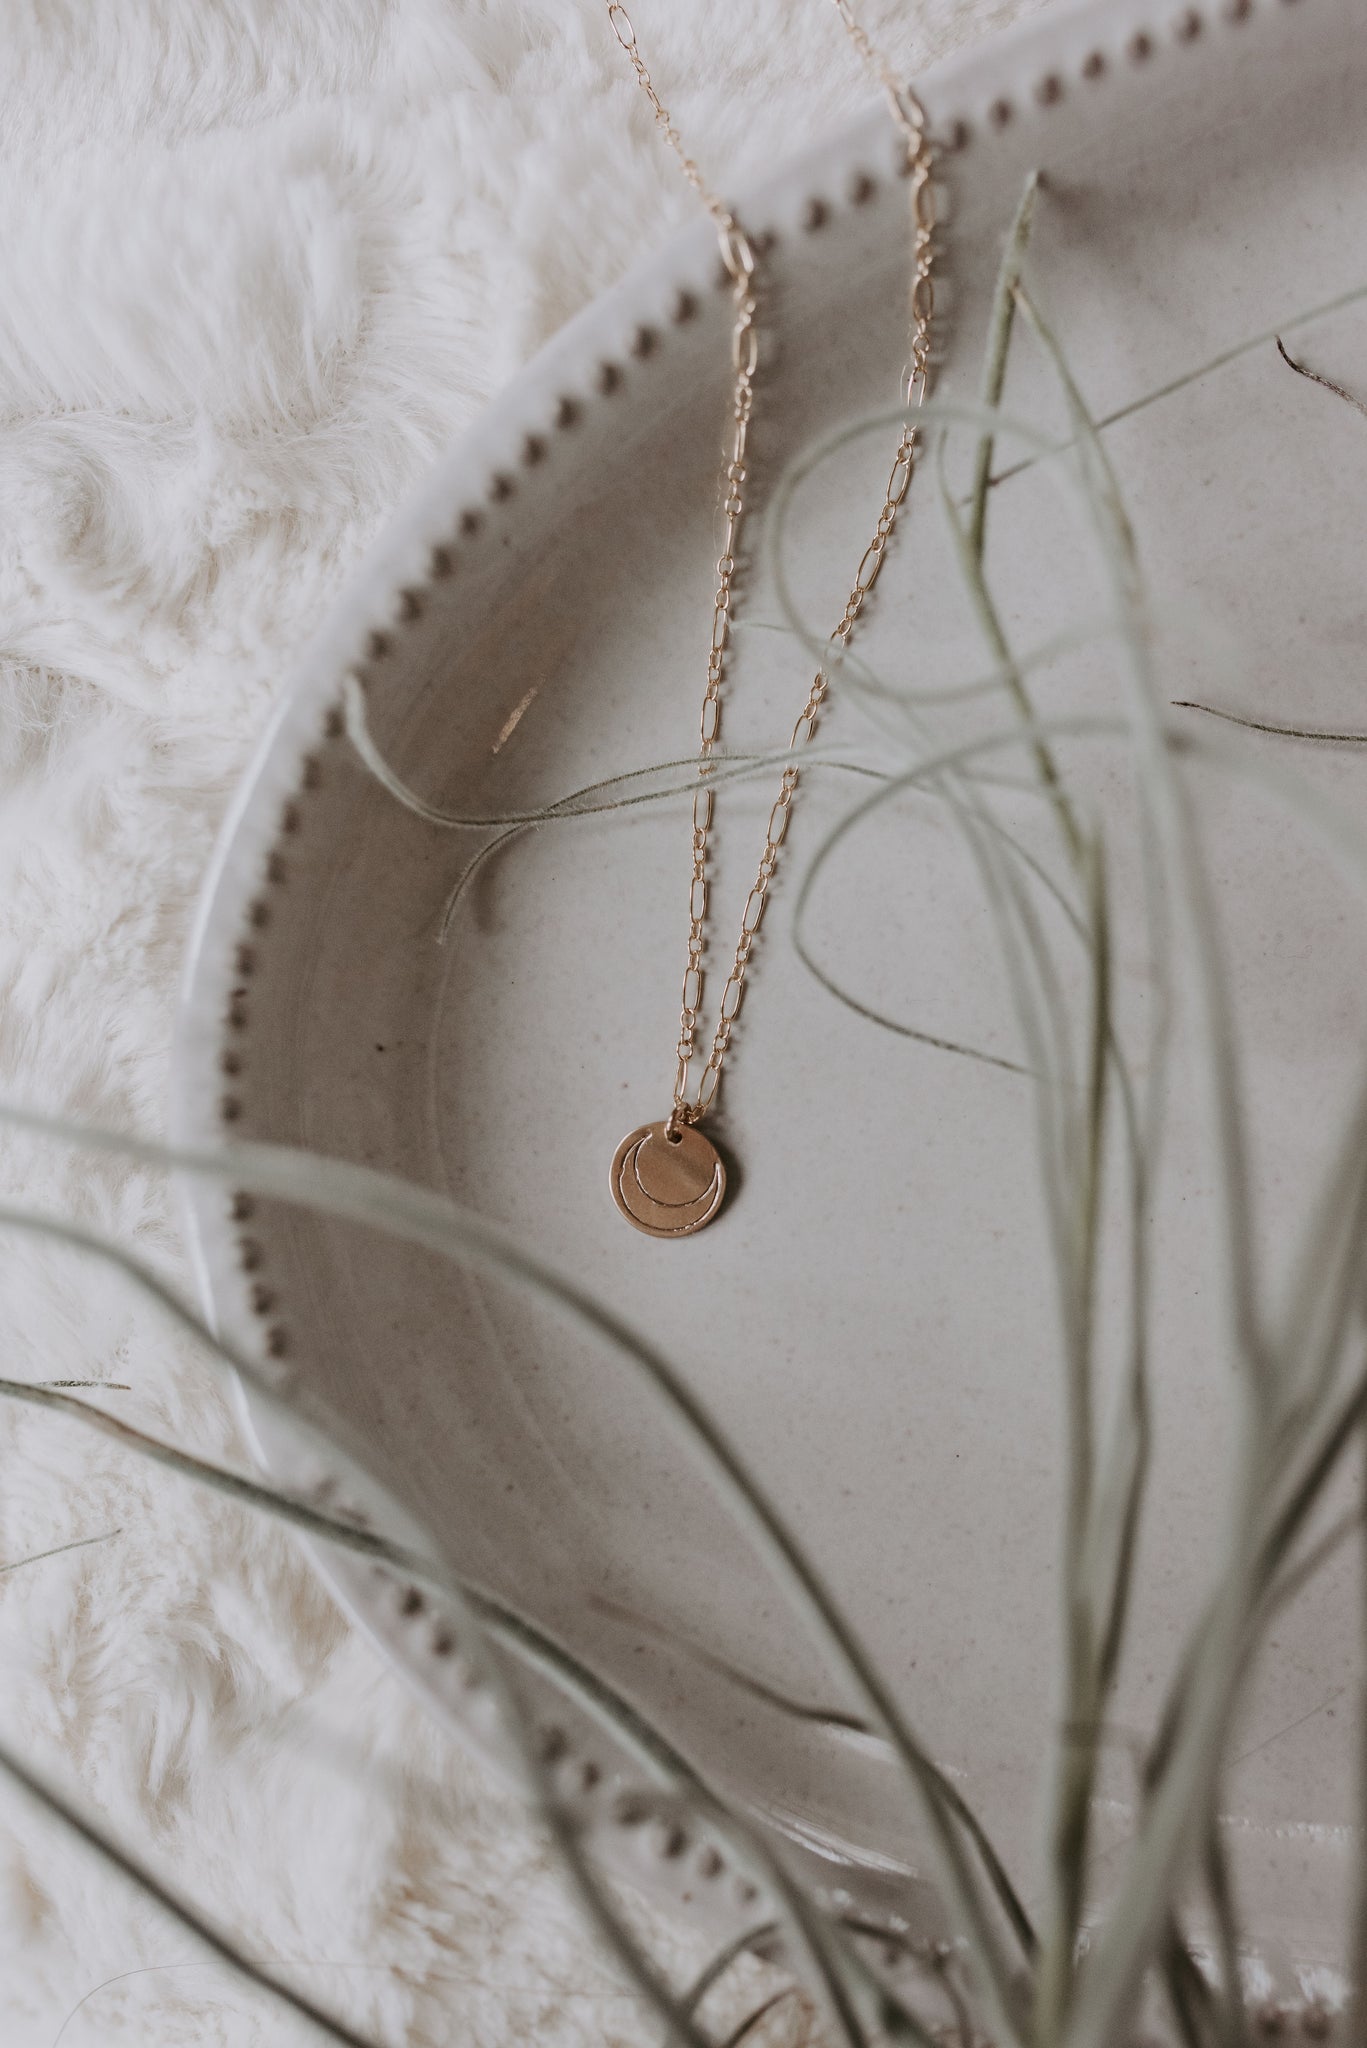 Sedona Crescent Necklace - Gold Filled